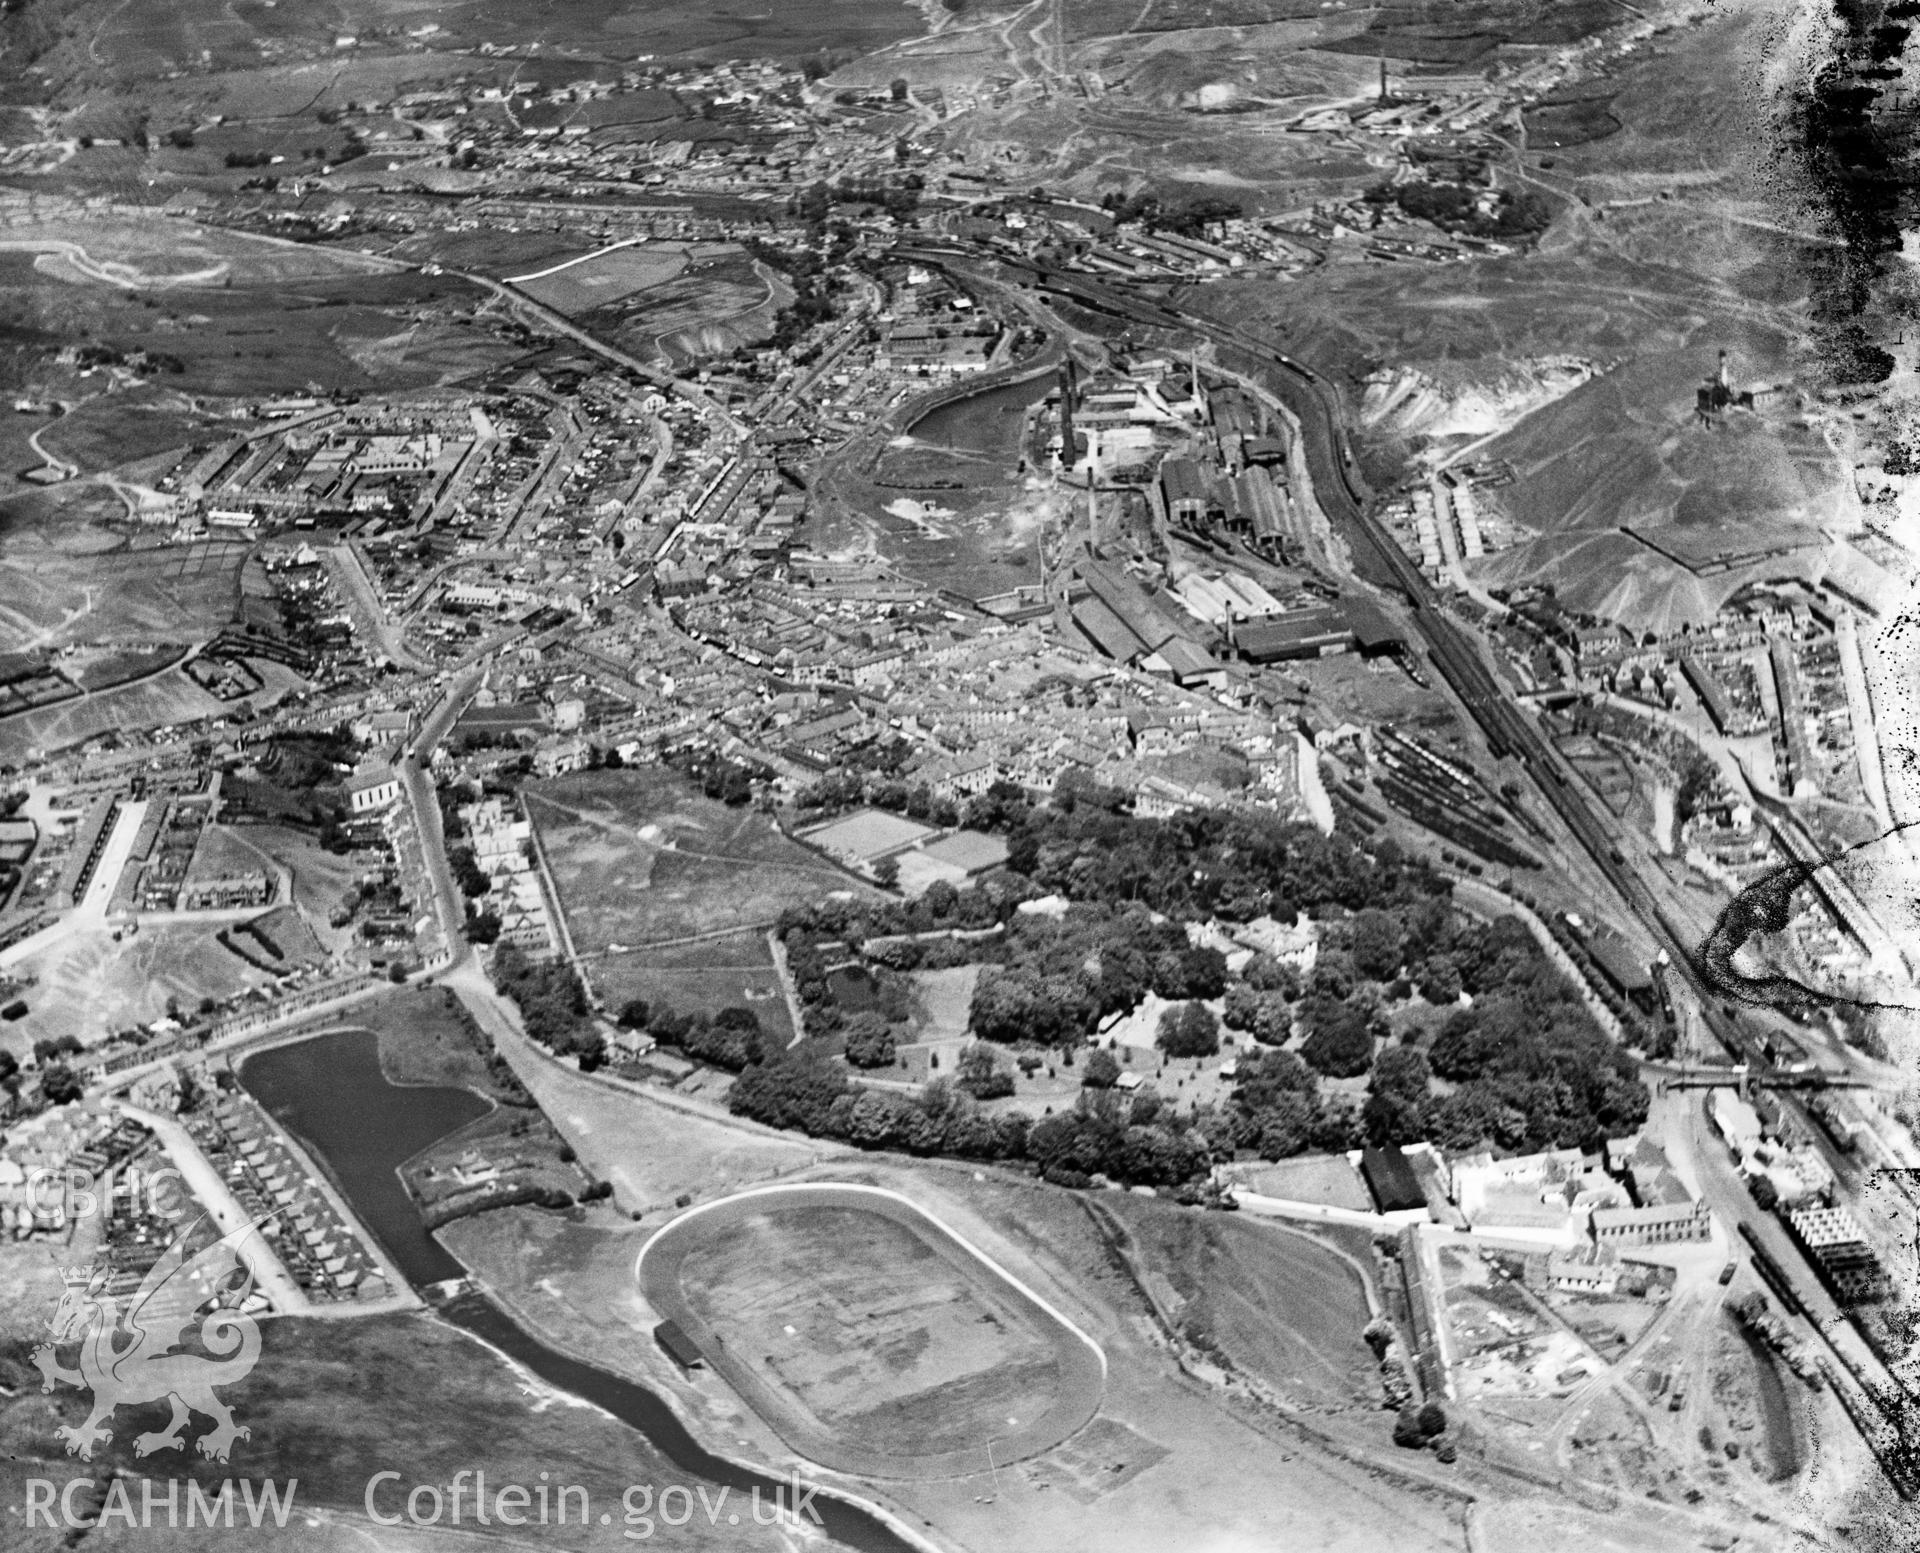 View of Tredegar, Bedwellty Park and recreation ground, oblique aerial view. 5?x4? black and white glass plate negative.